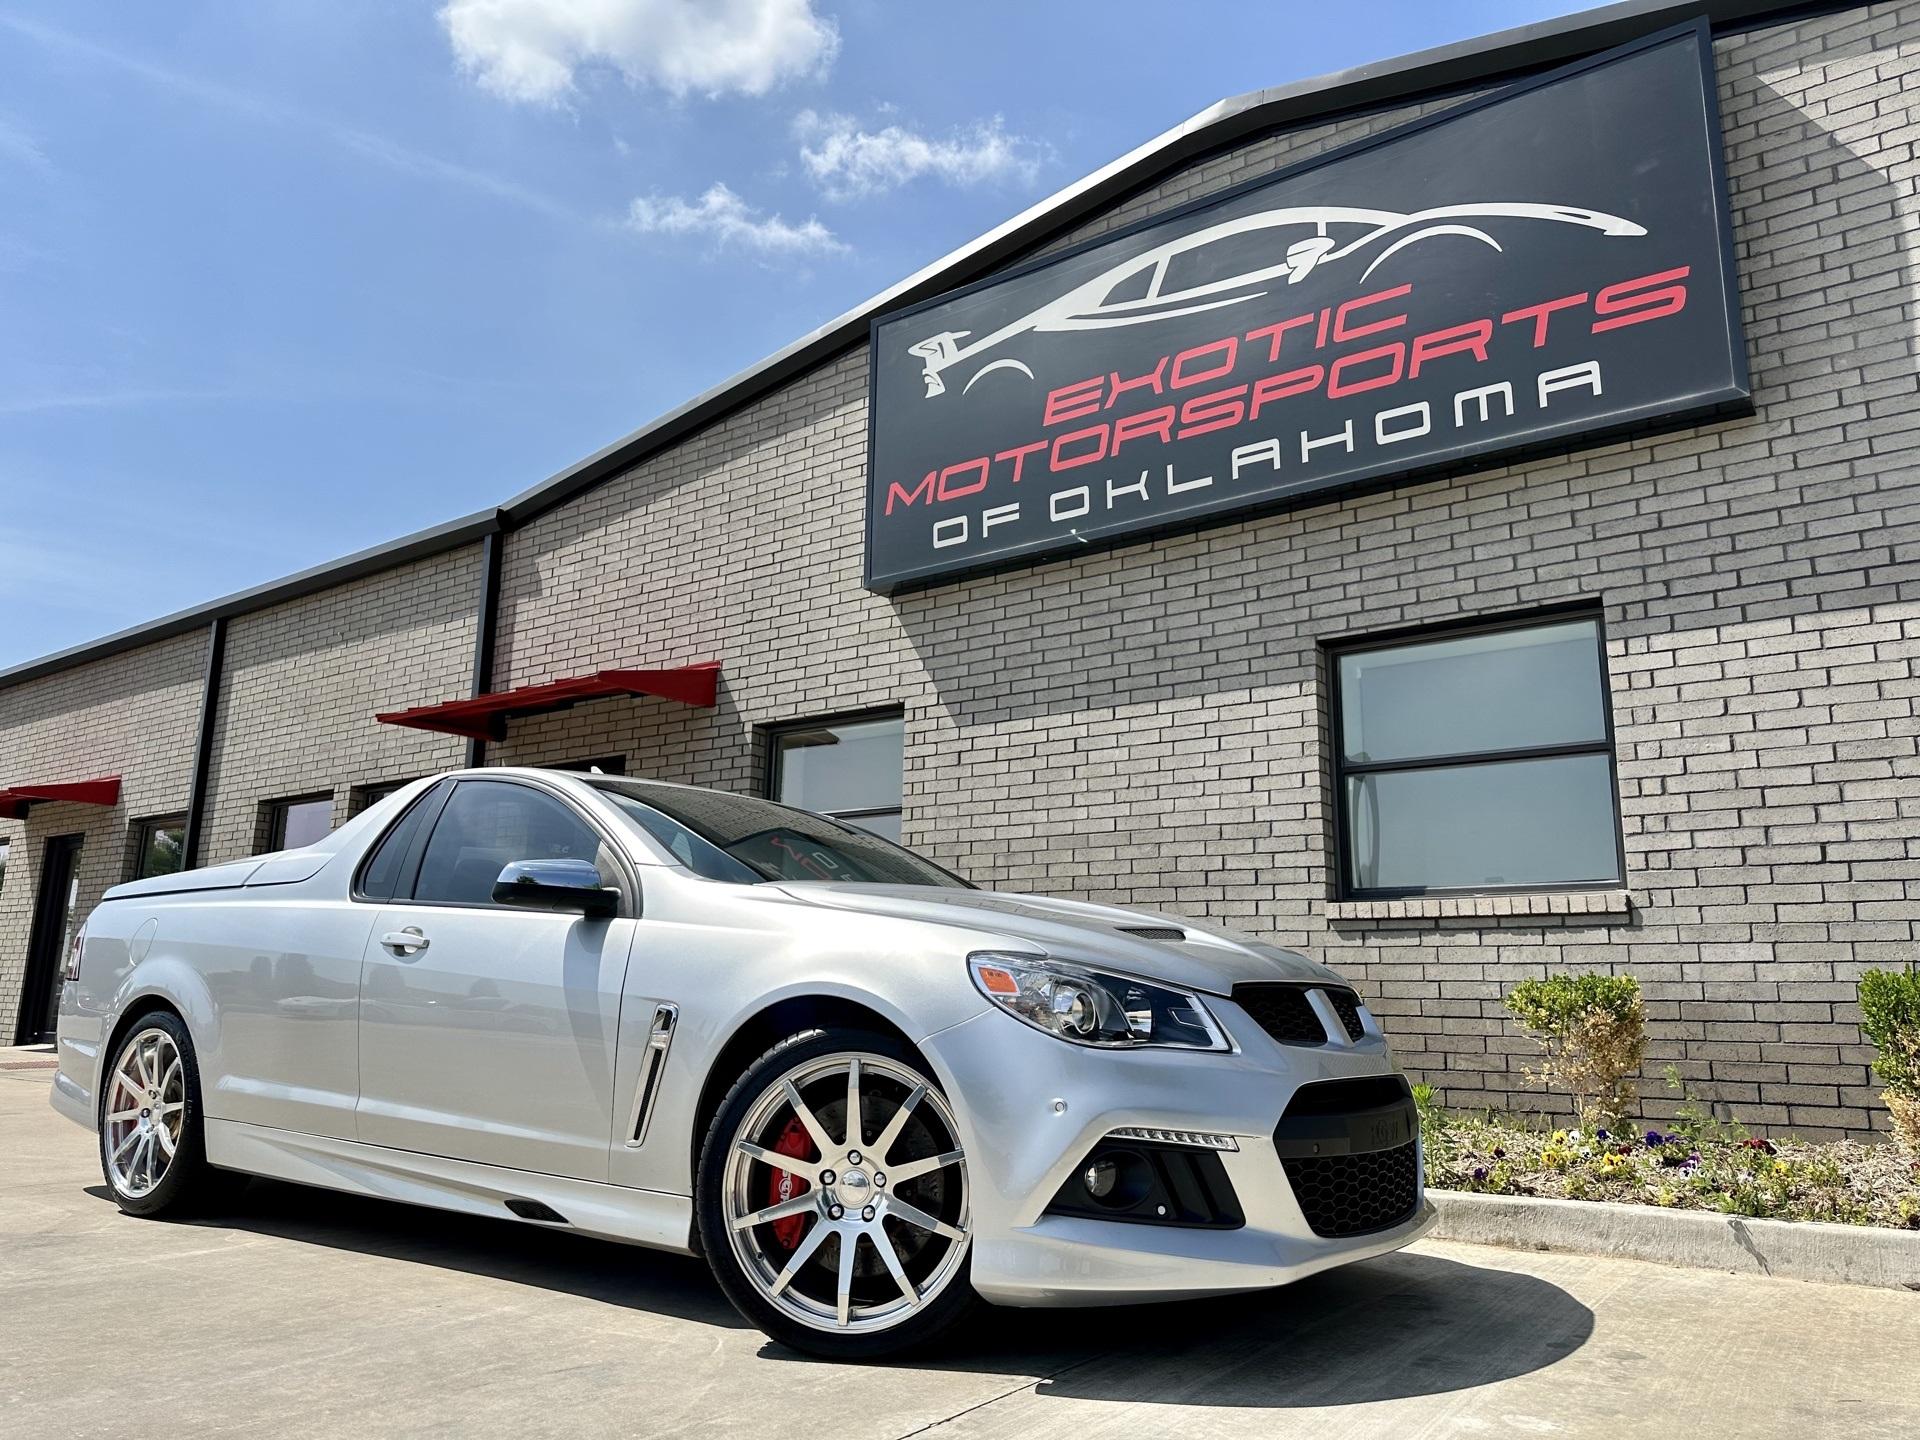 Used 2014 Holden Ute Maloo For Sale Sold Exotic Motorsports Of